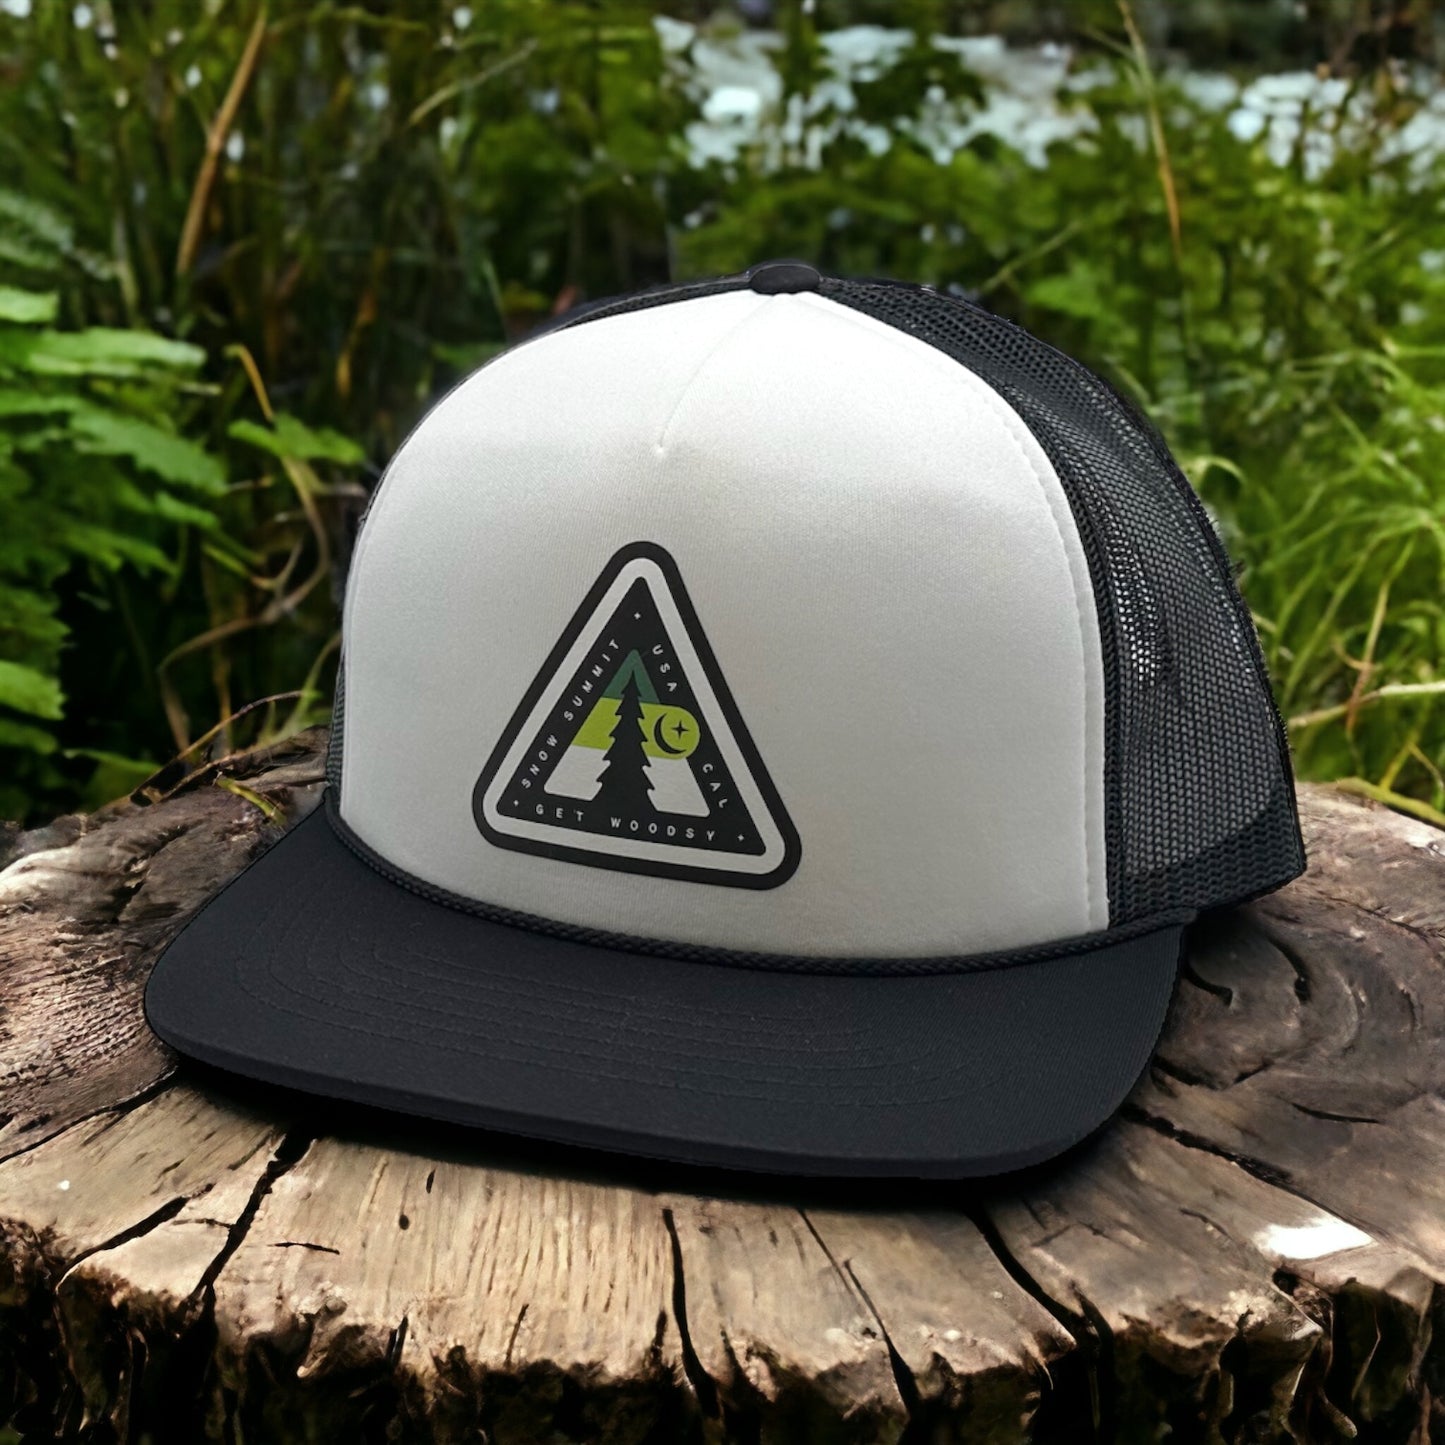 White and black trucker hat with Snow Summit Woodsy logo